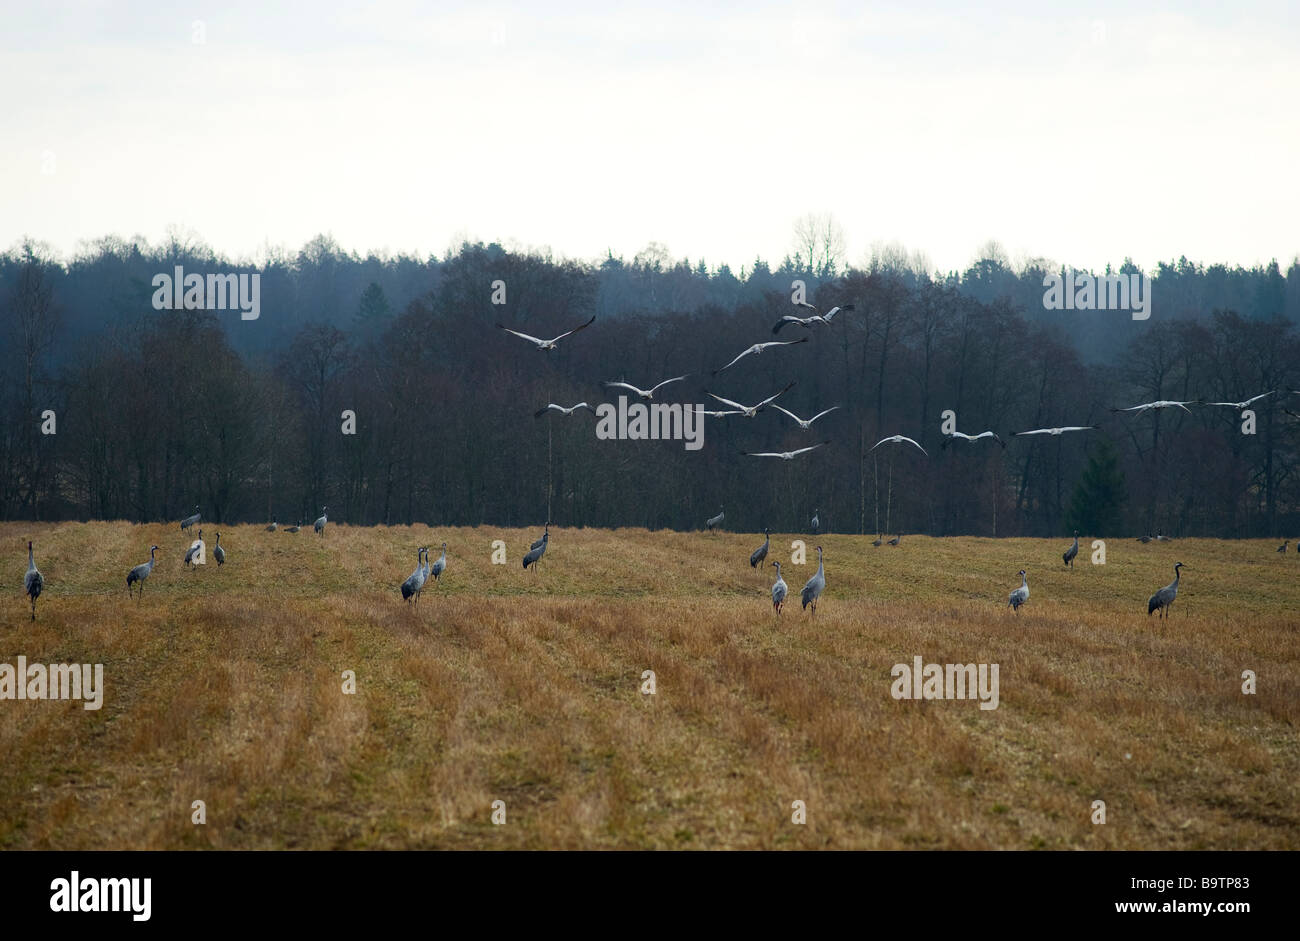 Cranes on and above a field, Sweden Stock Photo